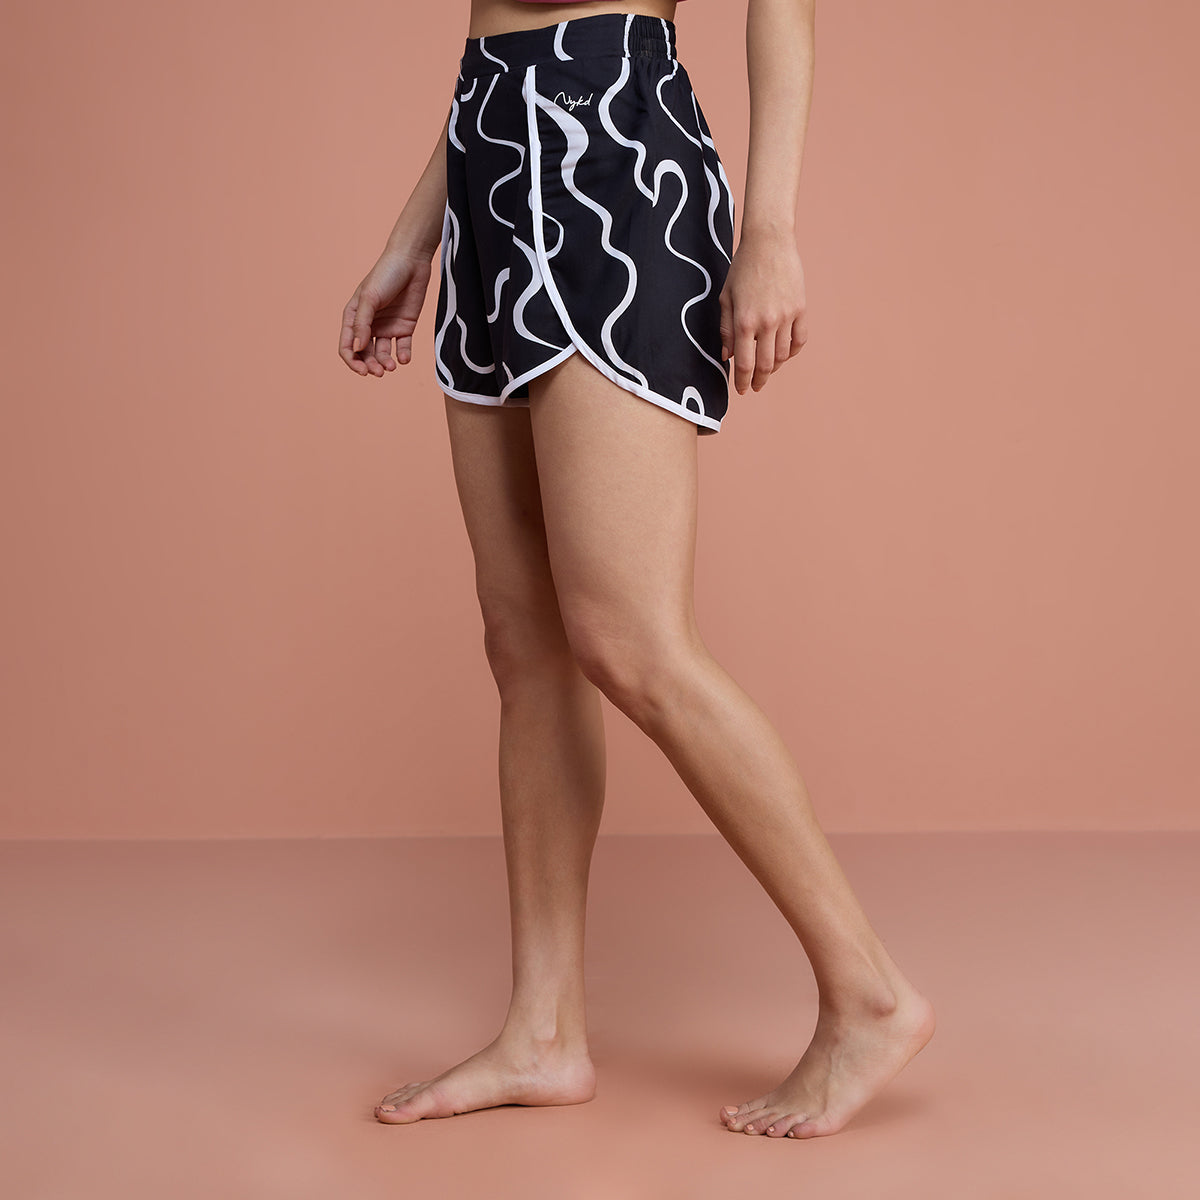 Sleep In Step Out Shorts  - NYS135 - Swiggly Black